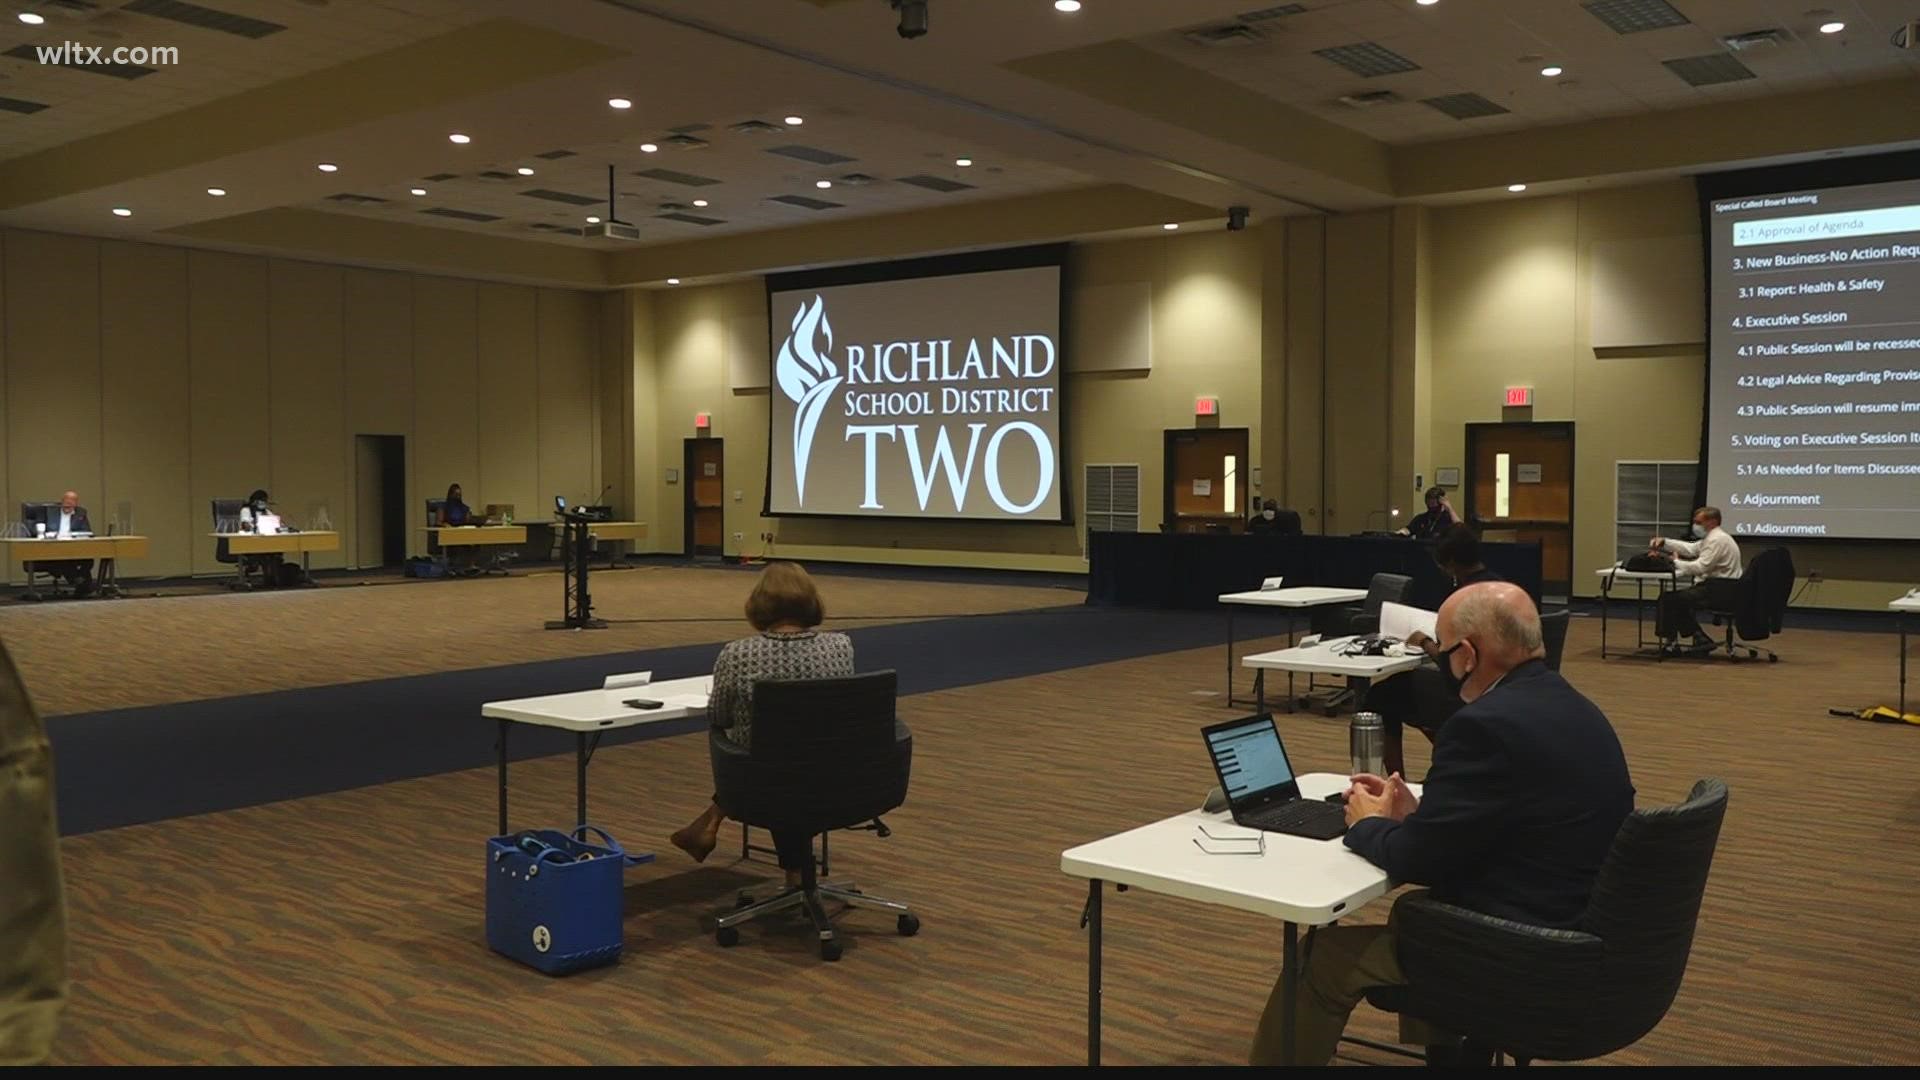 In a six to one vote, the Richland Two school district voted to meet with their legal counsel to discuss their options